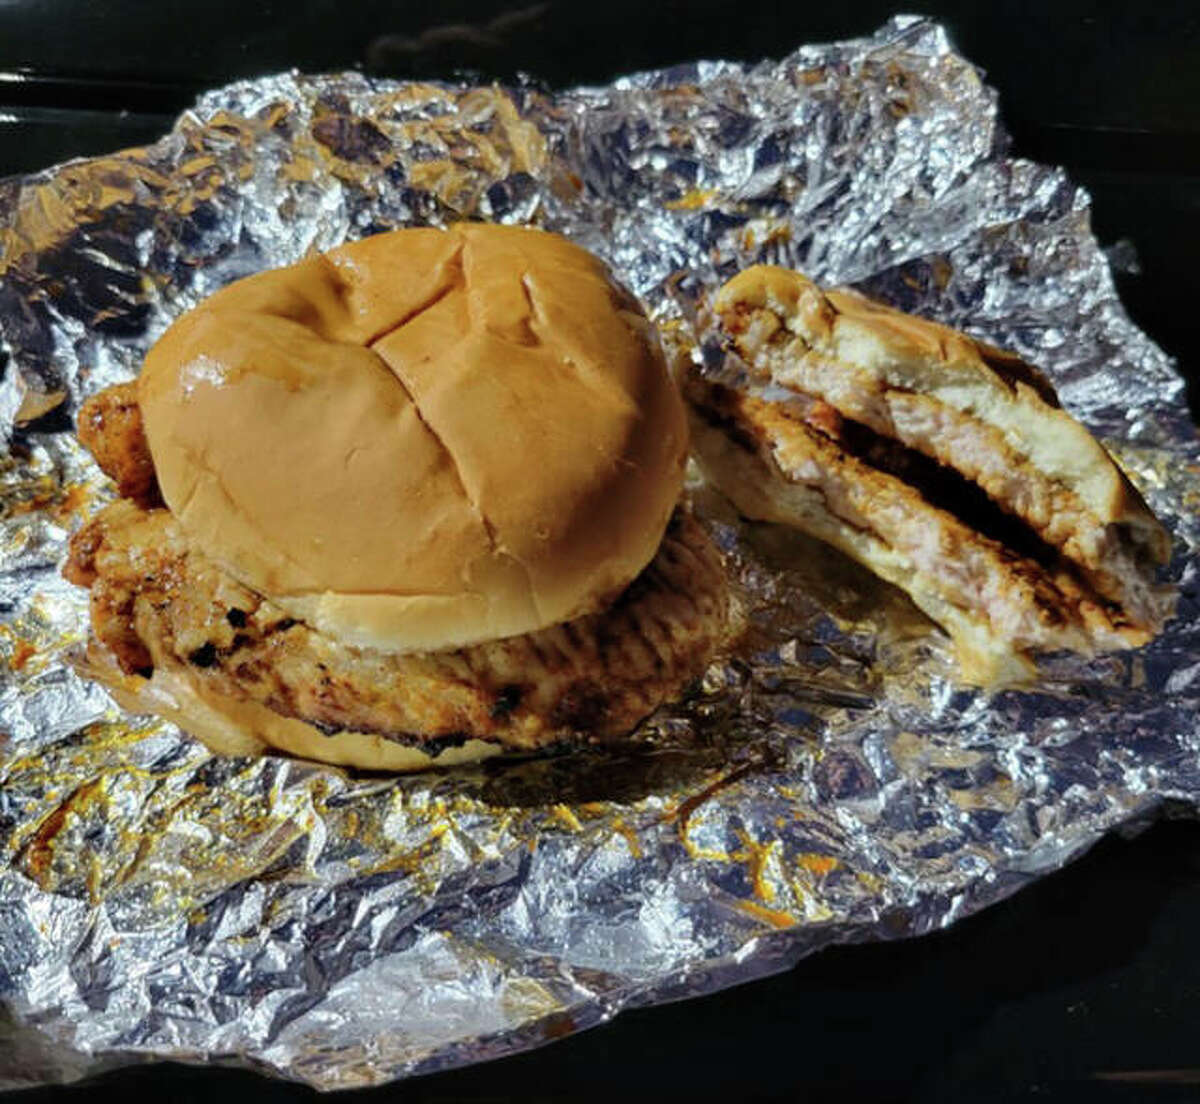 Pork chop sandwiches served at Carlinville High School’s concession stand during football games have been named among the top four in Illinois. Online voting is this week to determine the winner.